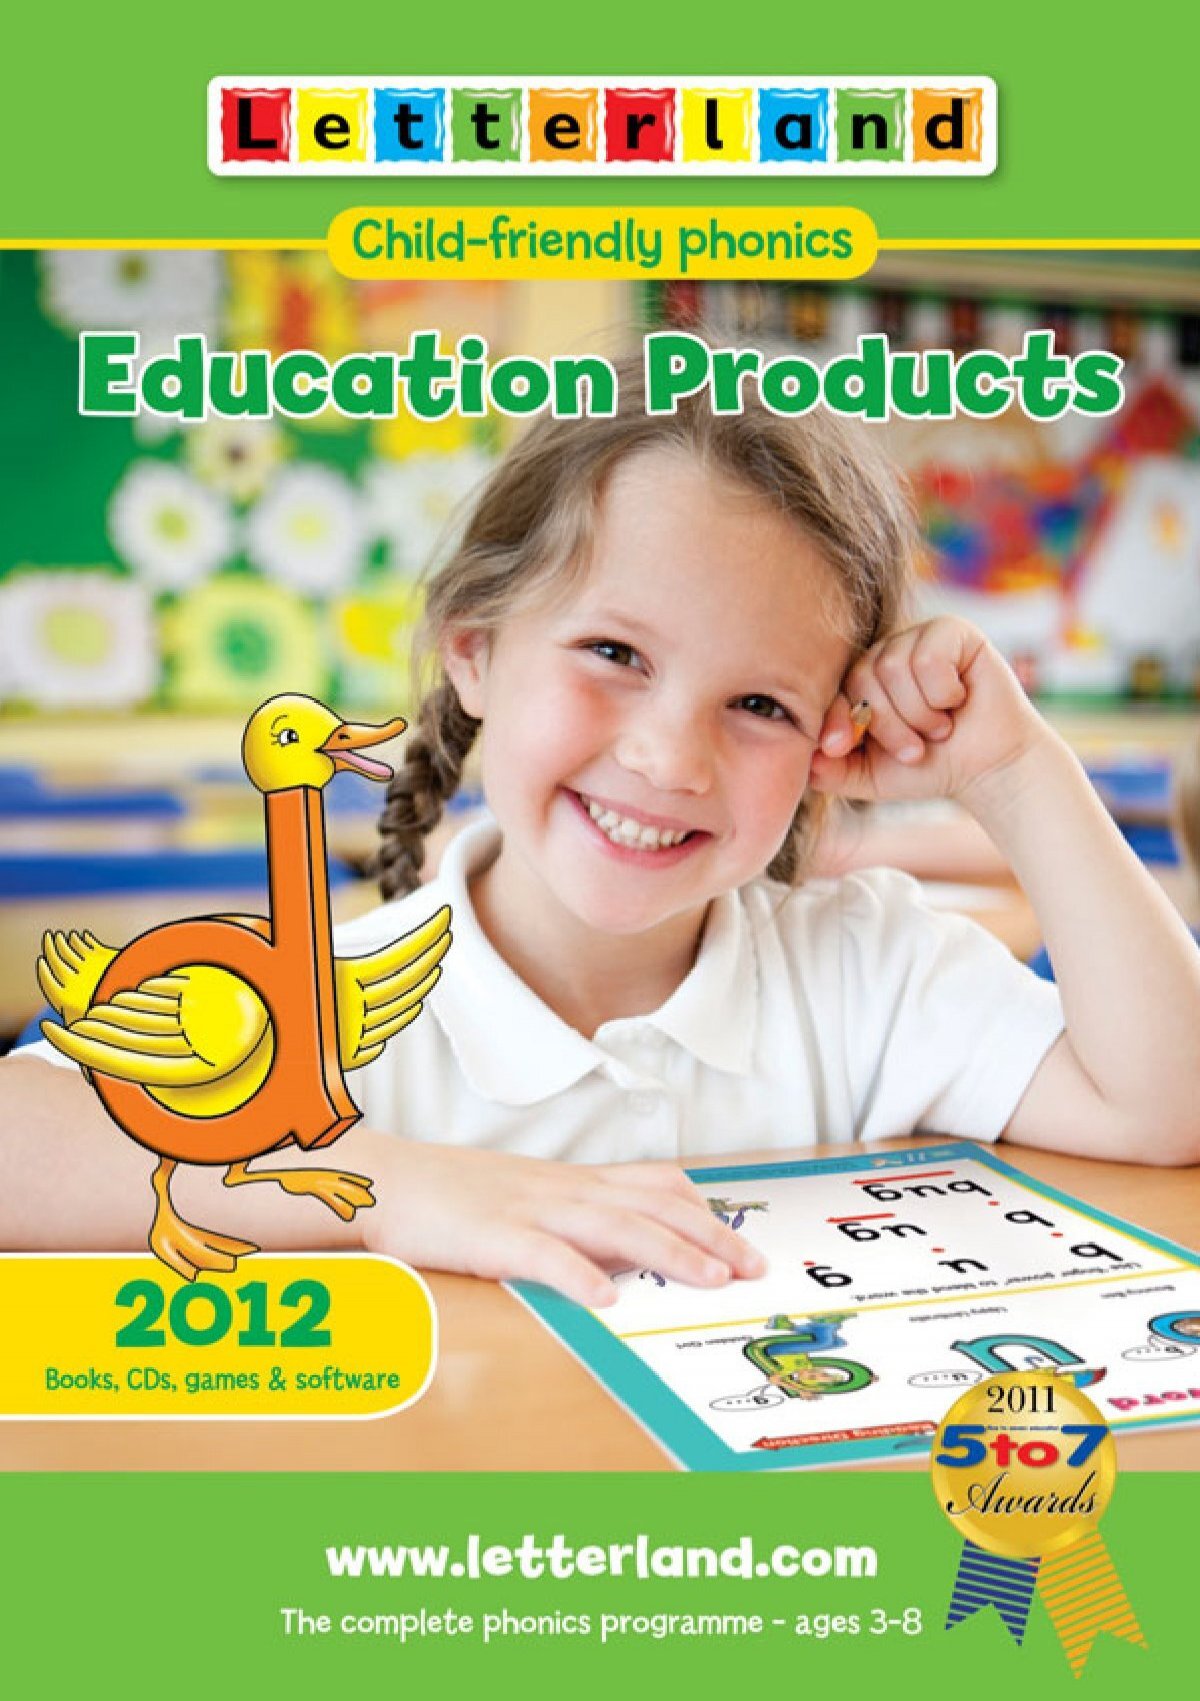 2012 Price list and order form for SCHOOL use - Letterland